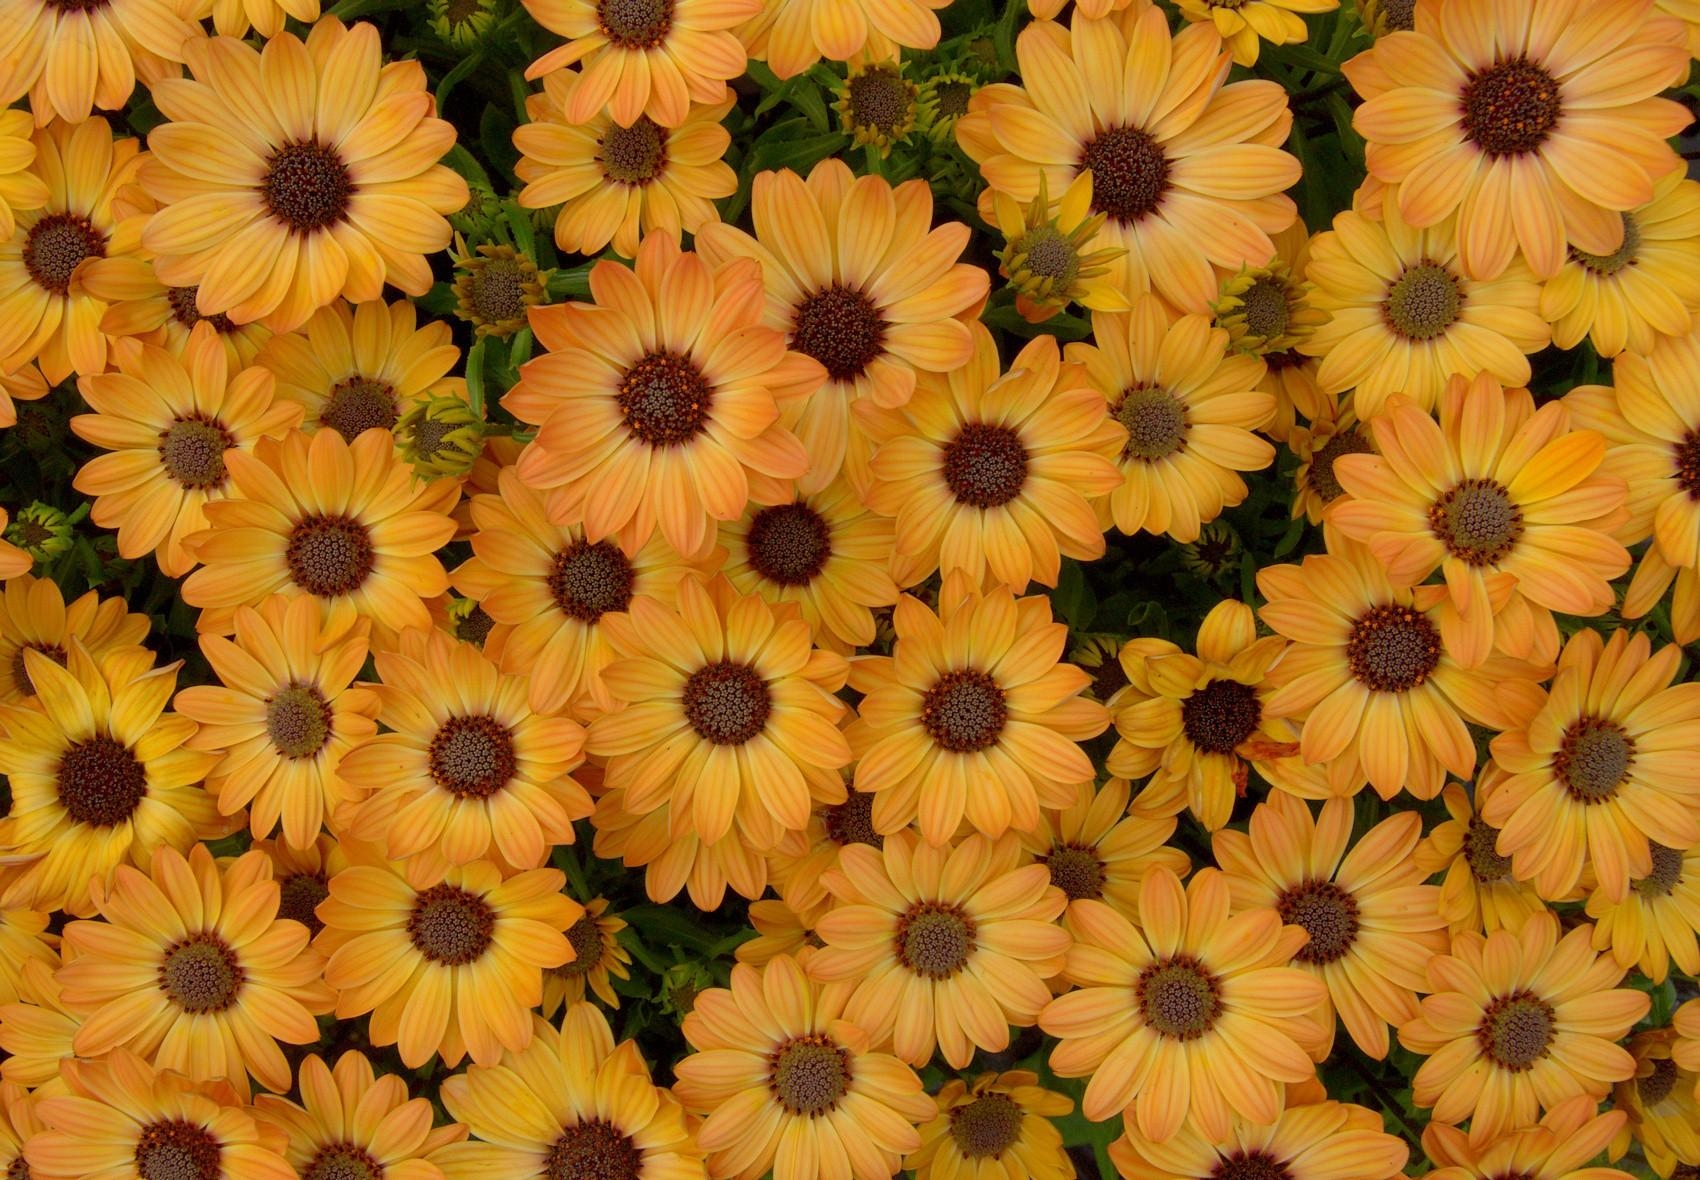 petals, flowers, yellow, flower bed, flowerbed, dimorfoteka, dimorphotheque wallpaper for mobile